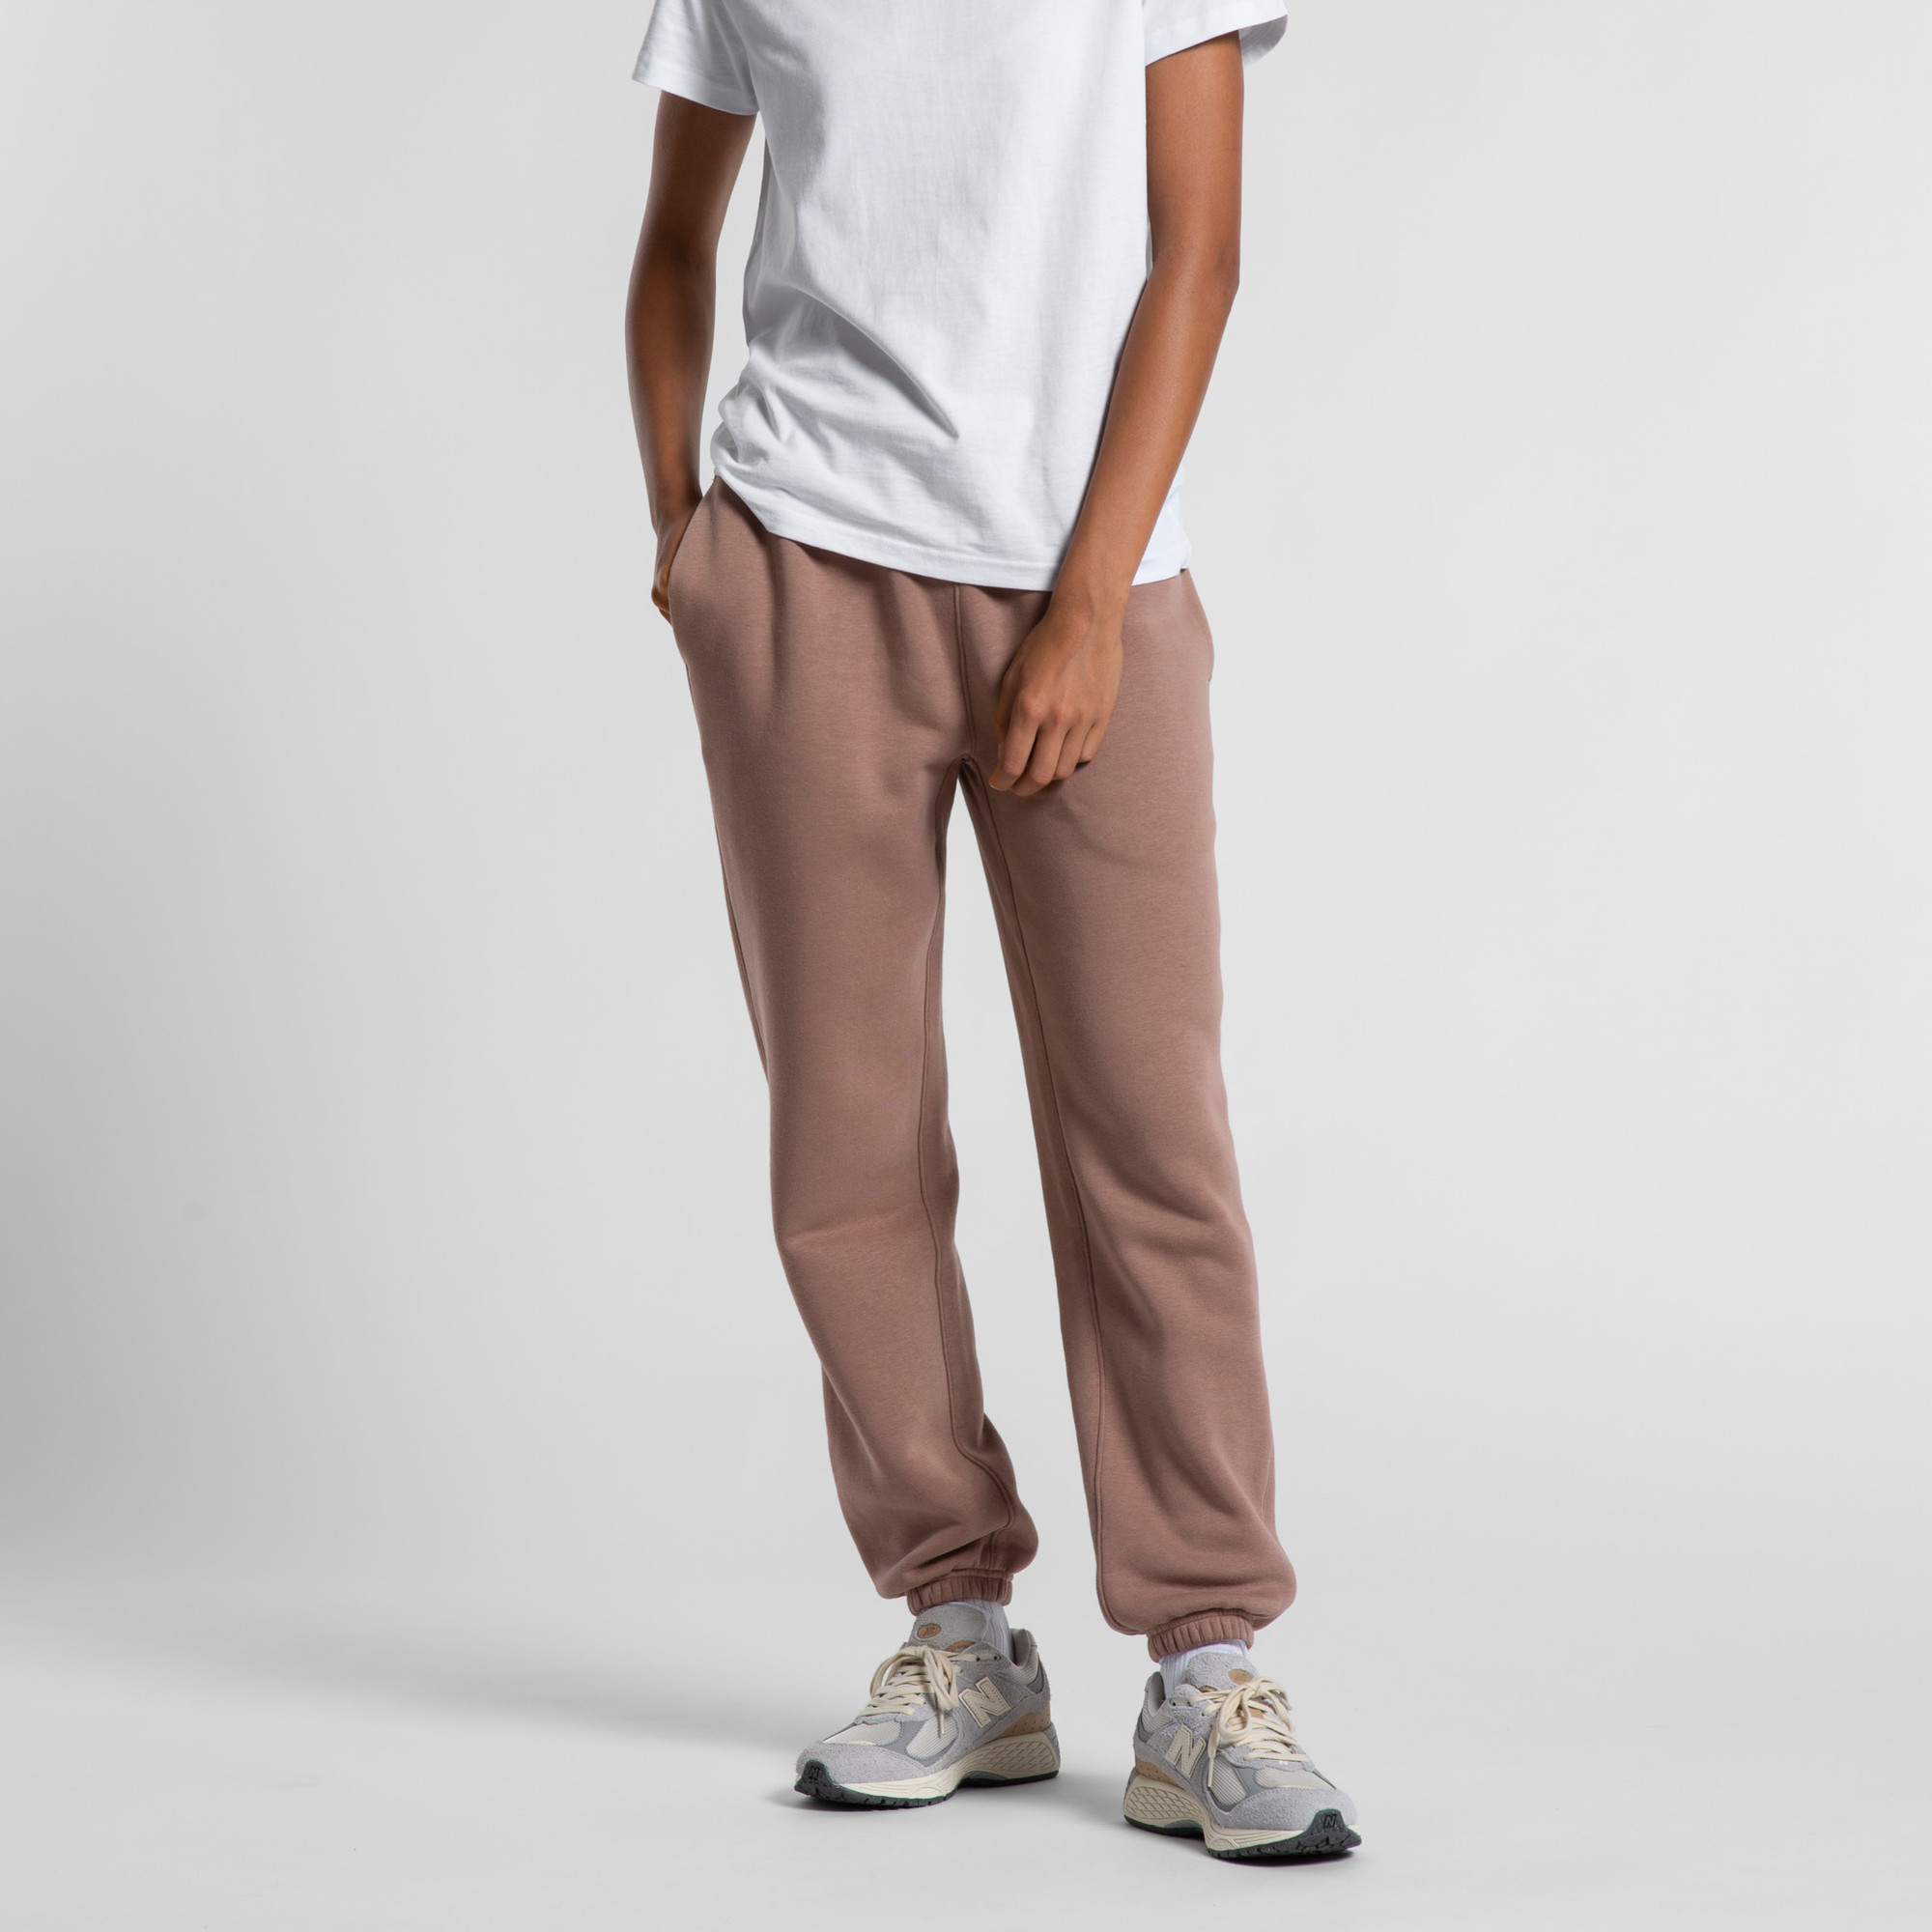 AS Colour Wo's Relax Track Pant